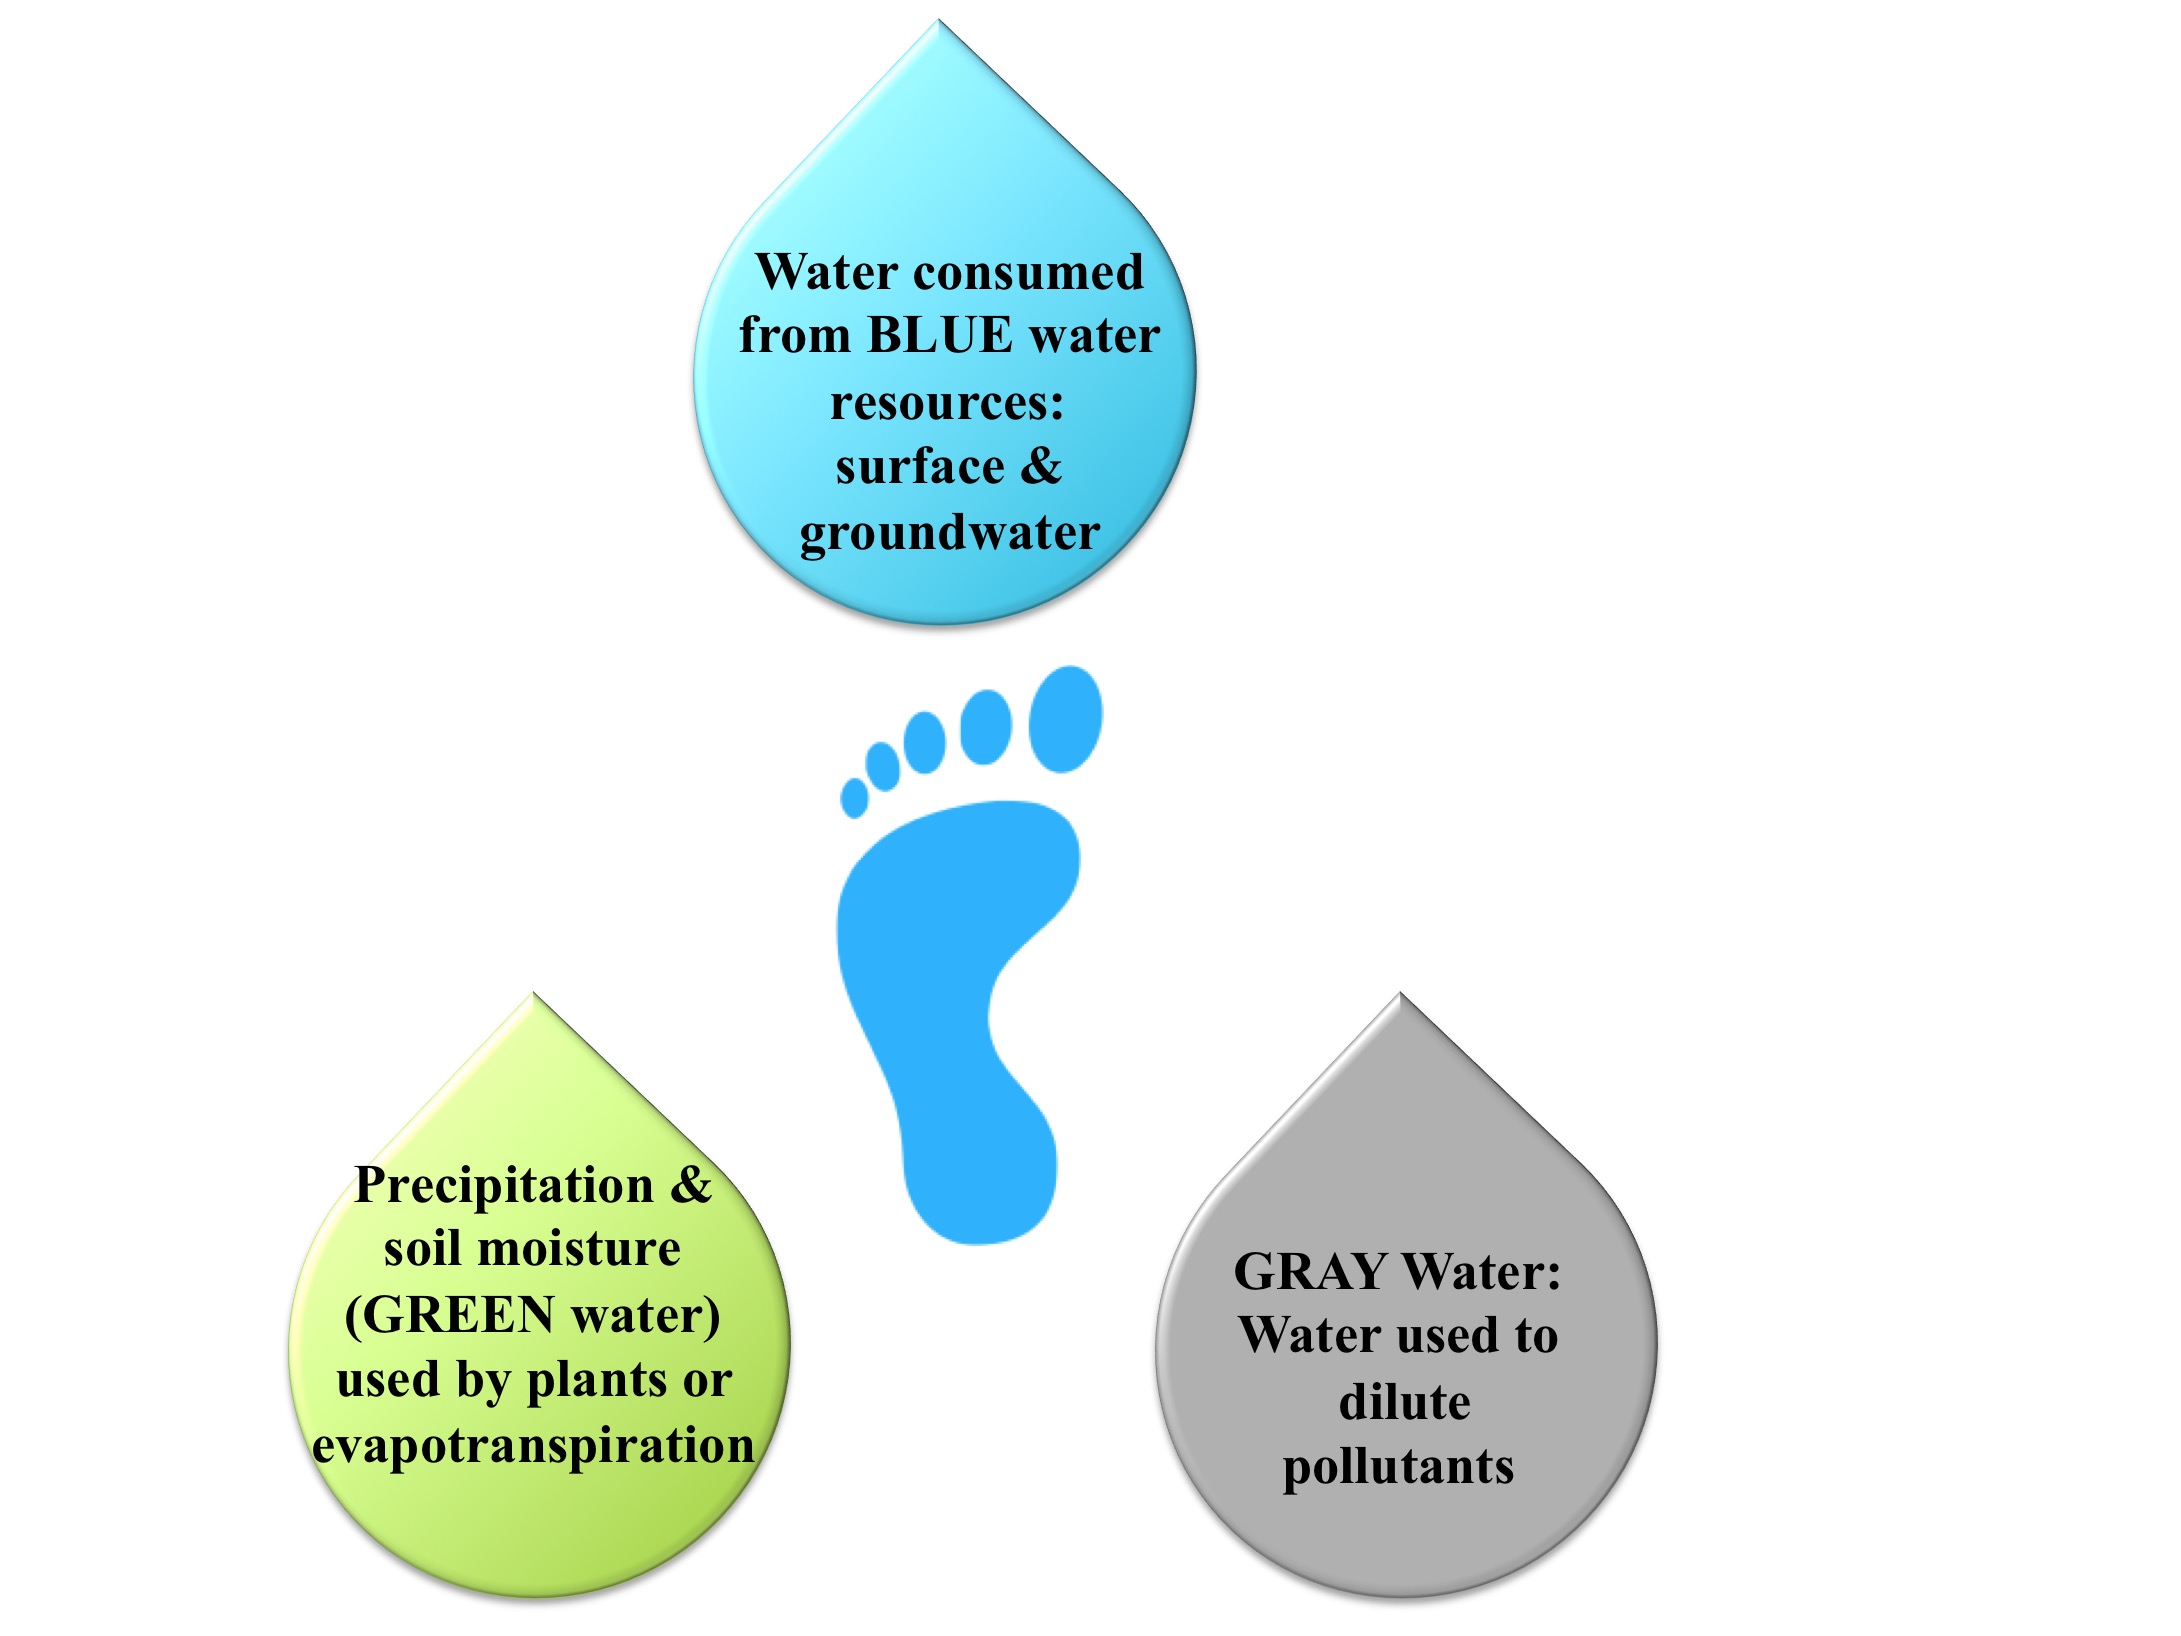 Figure 1. Three major components of water footprint: blue, green and gray footprints. Image drawn by author with image of foot taken from creative common source.